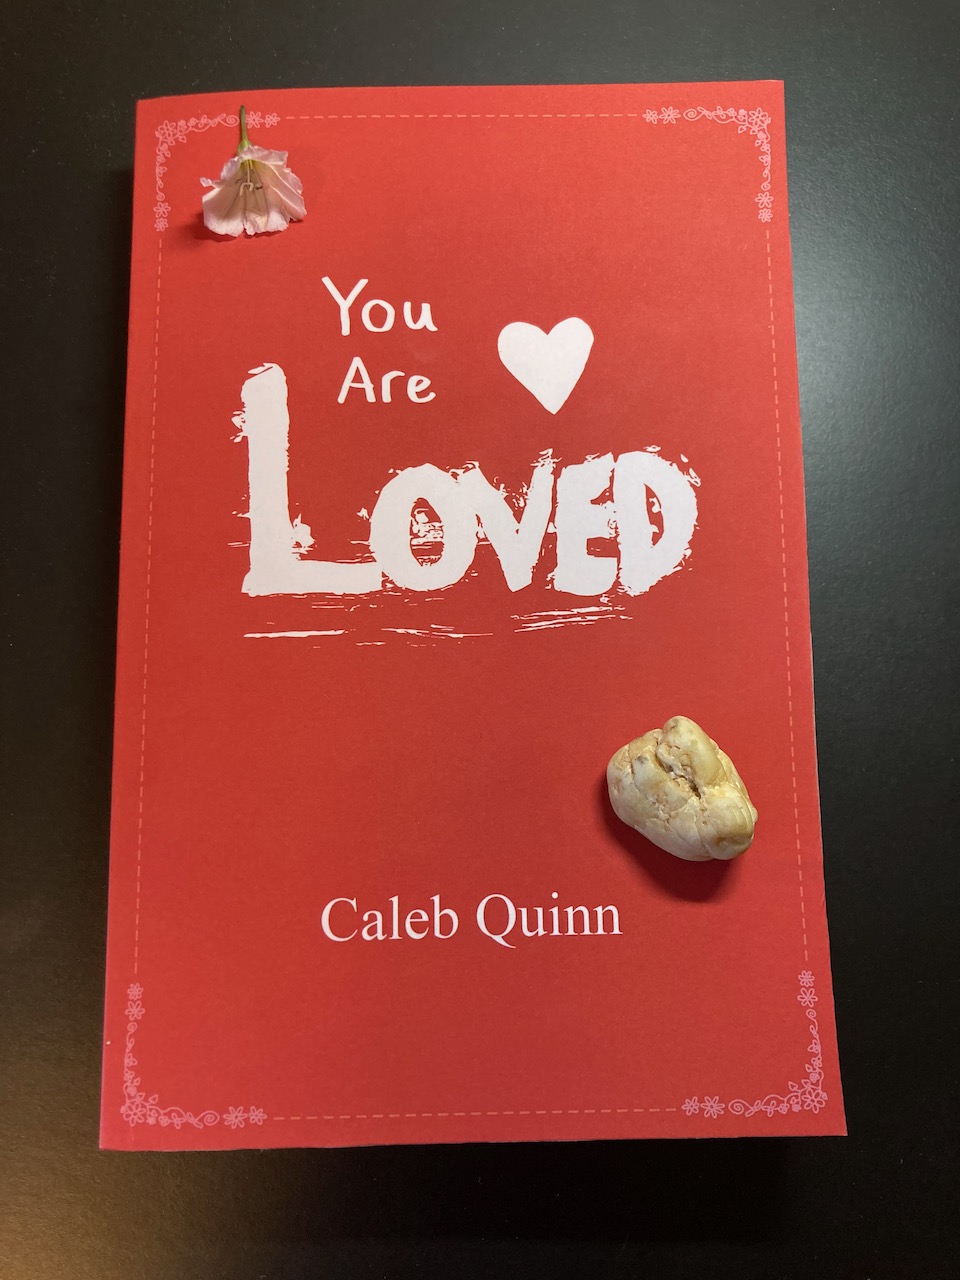 The book "You Are Loved" with a rock and a flower